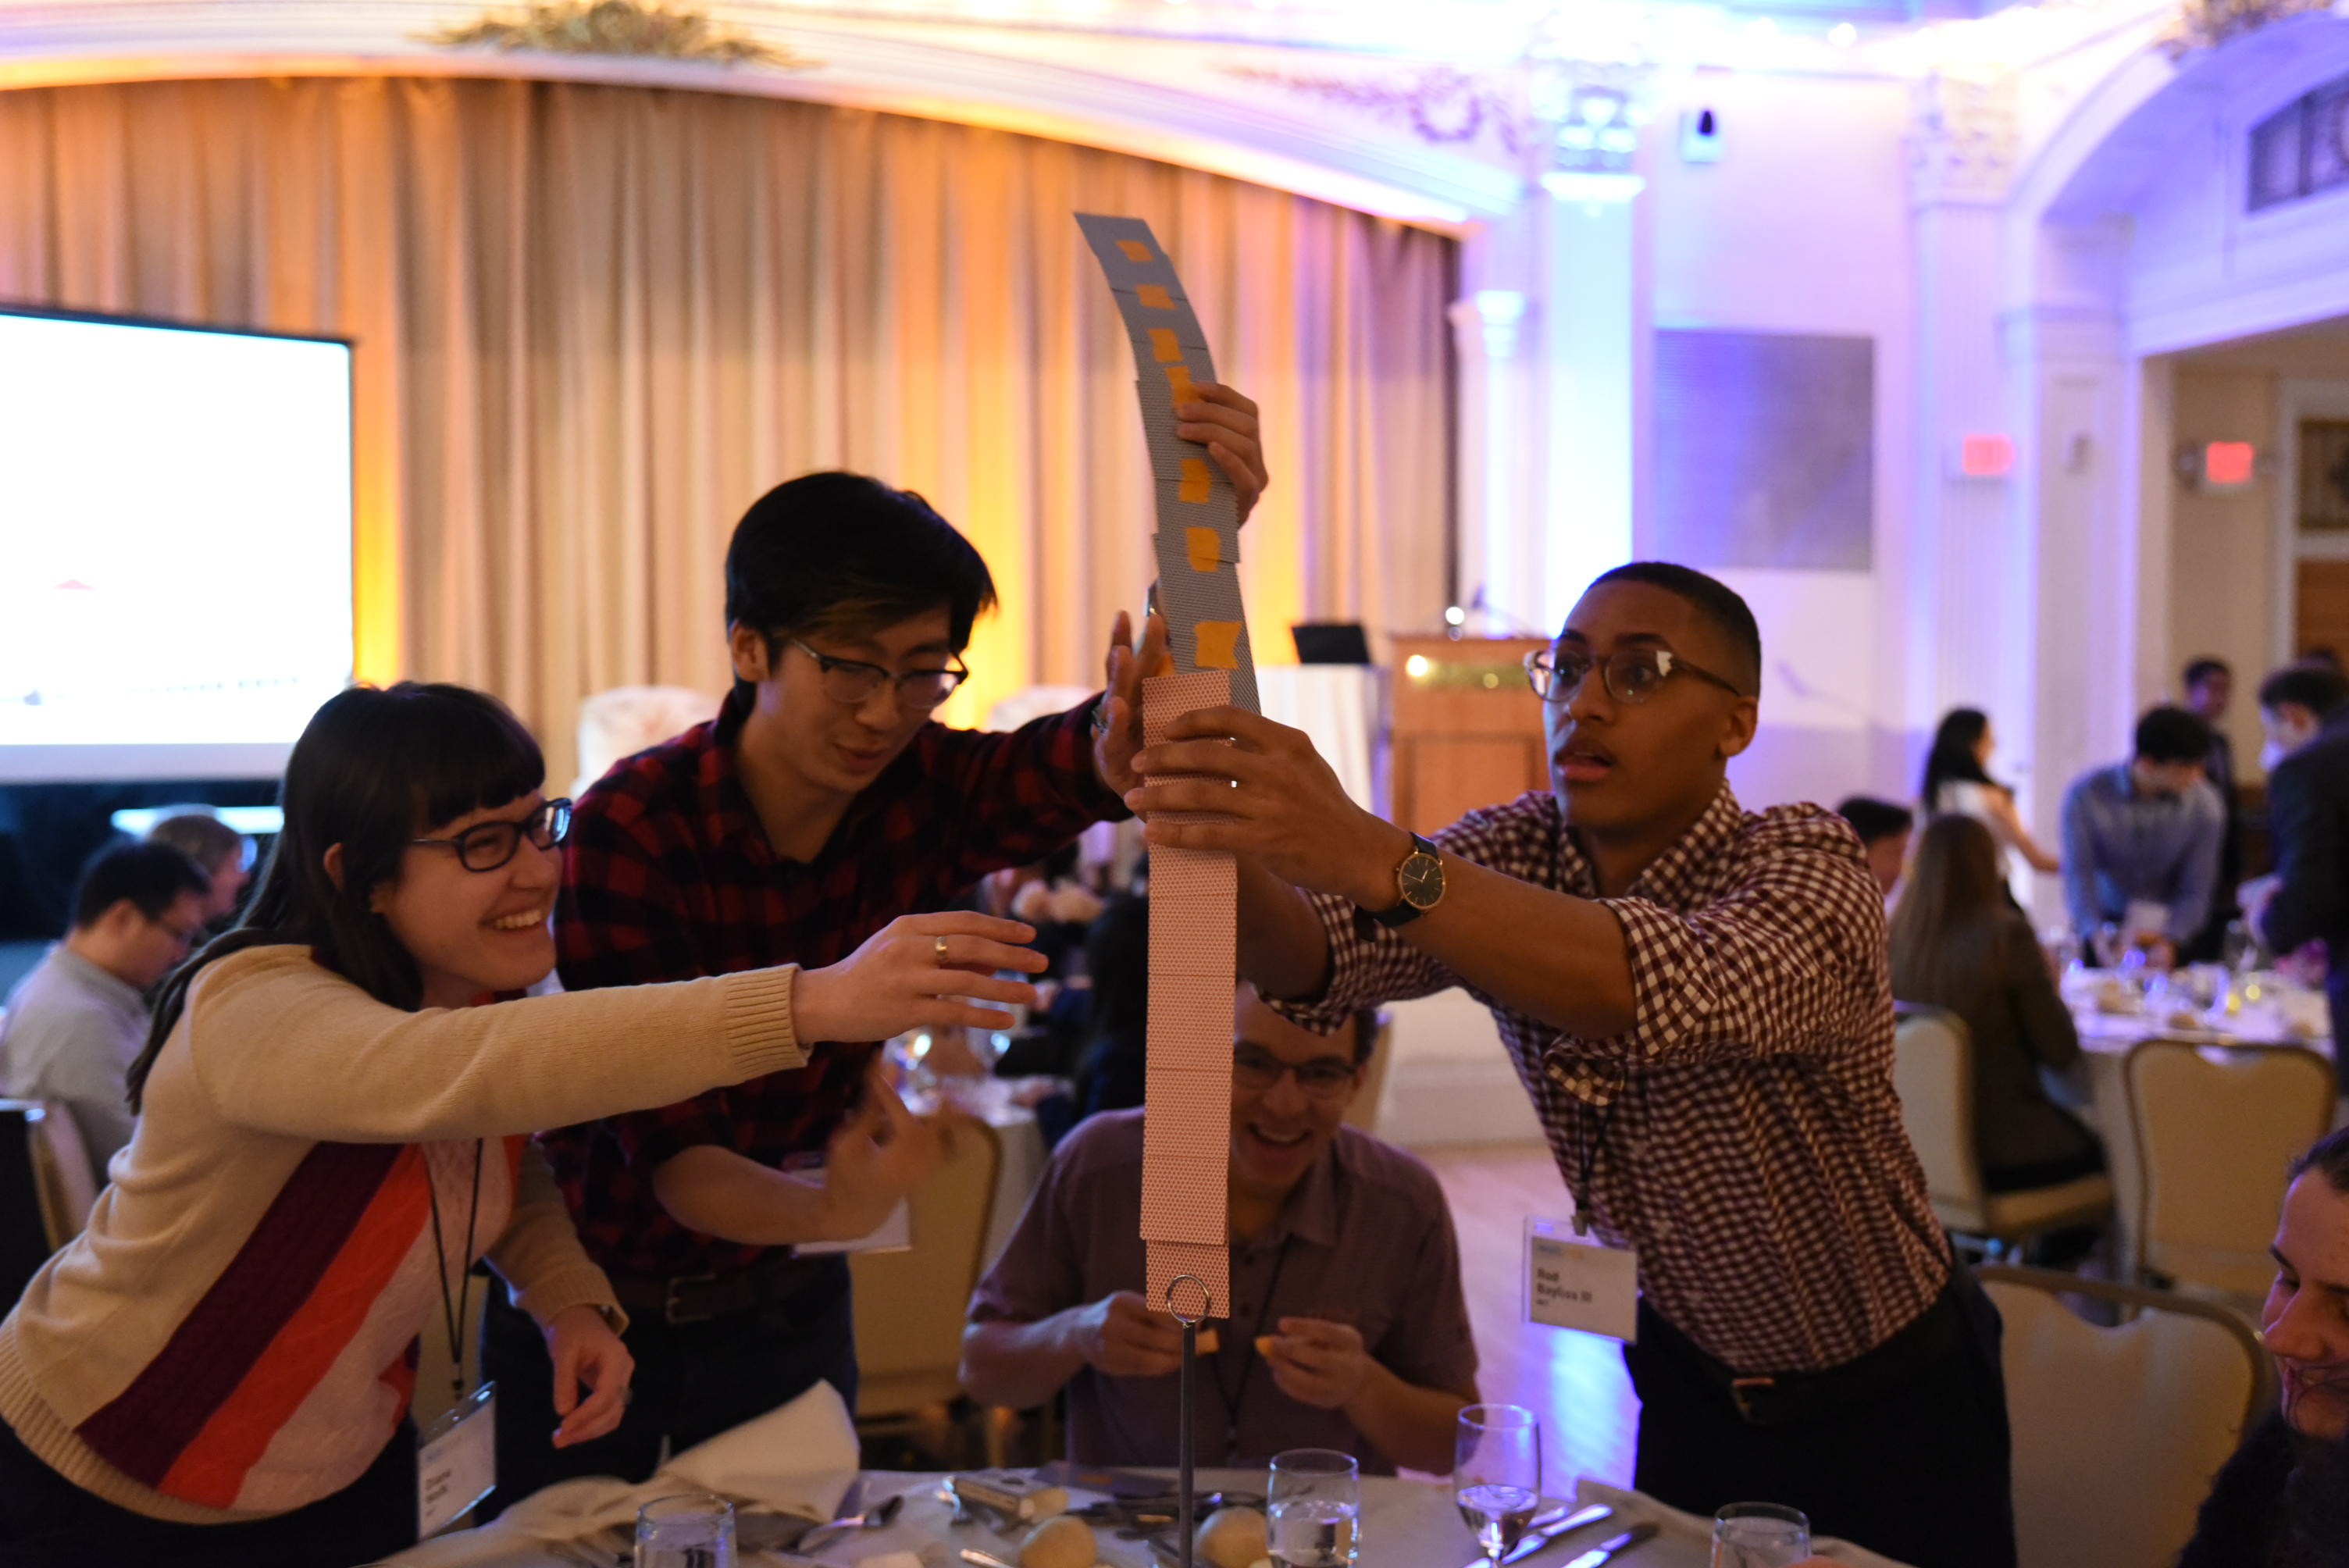 MARC attendees build a tower with playing cards.